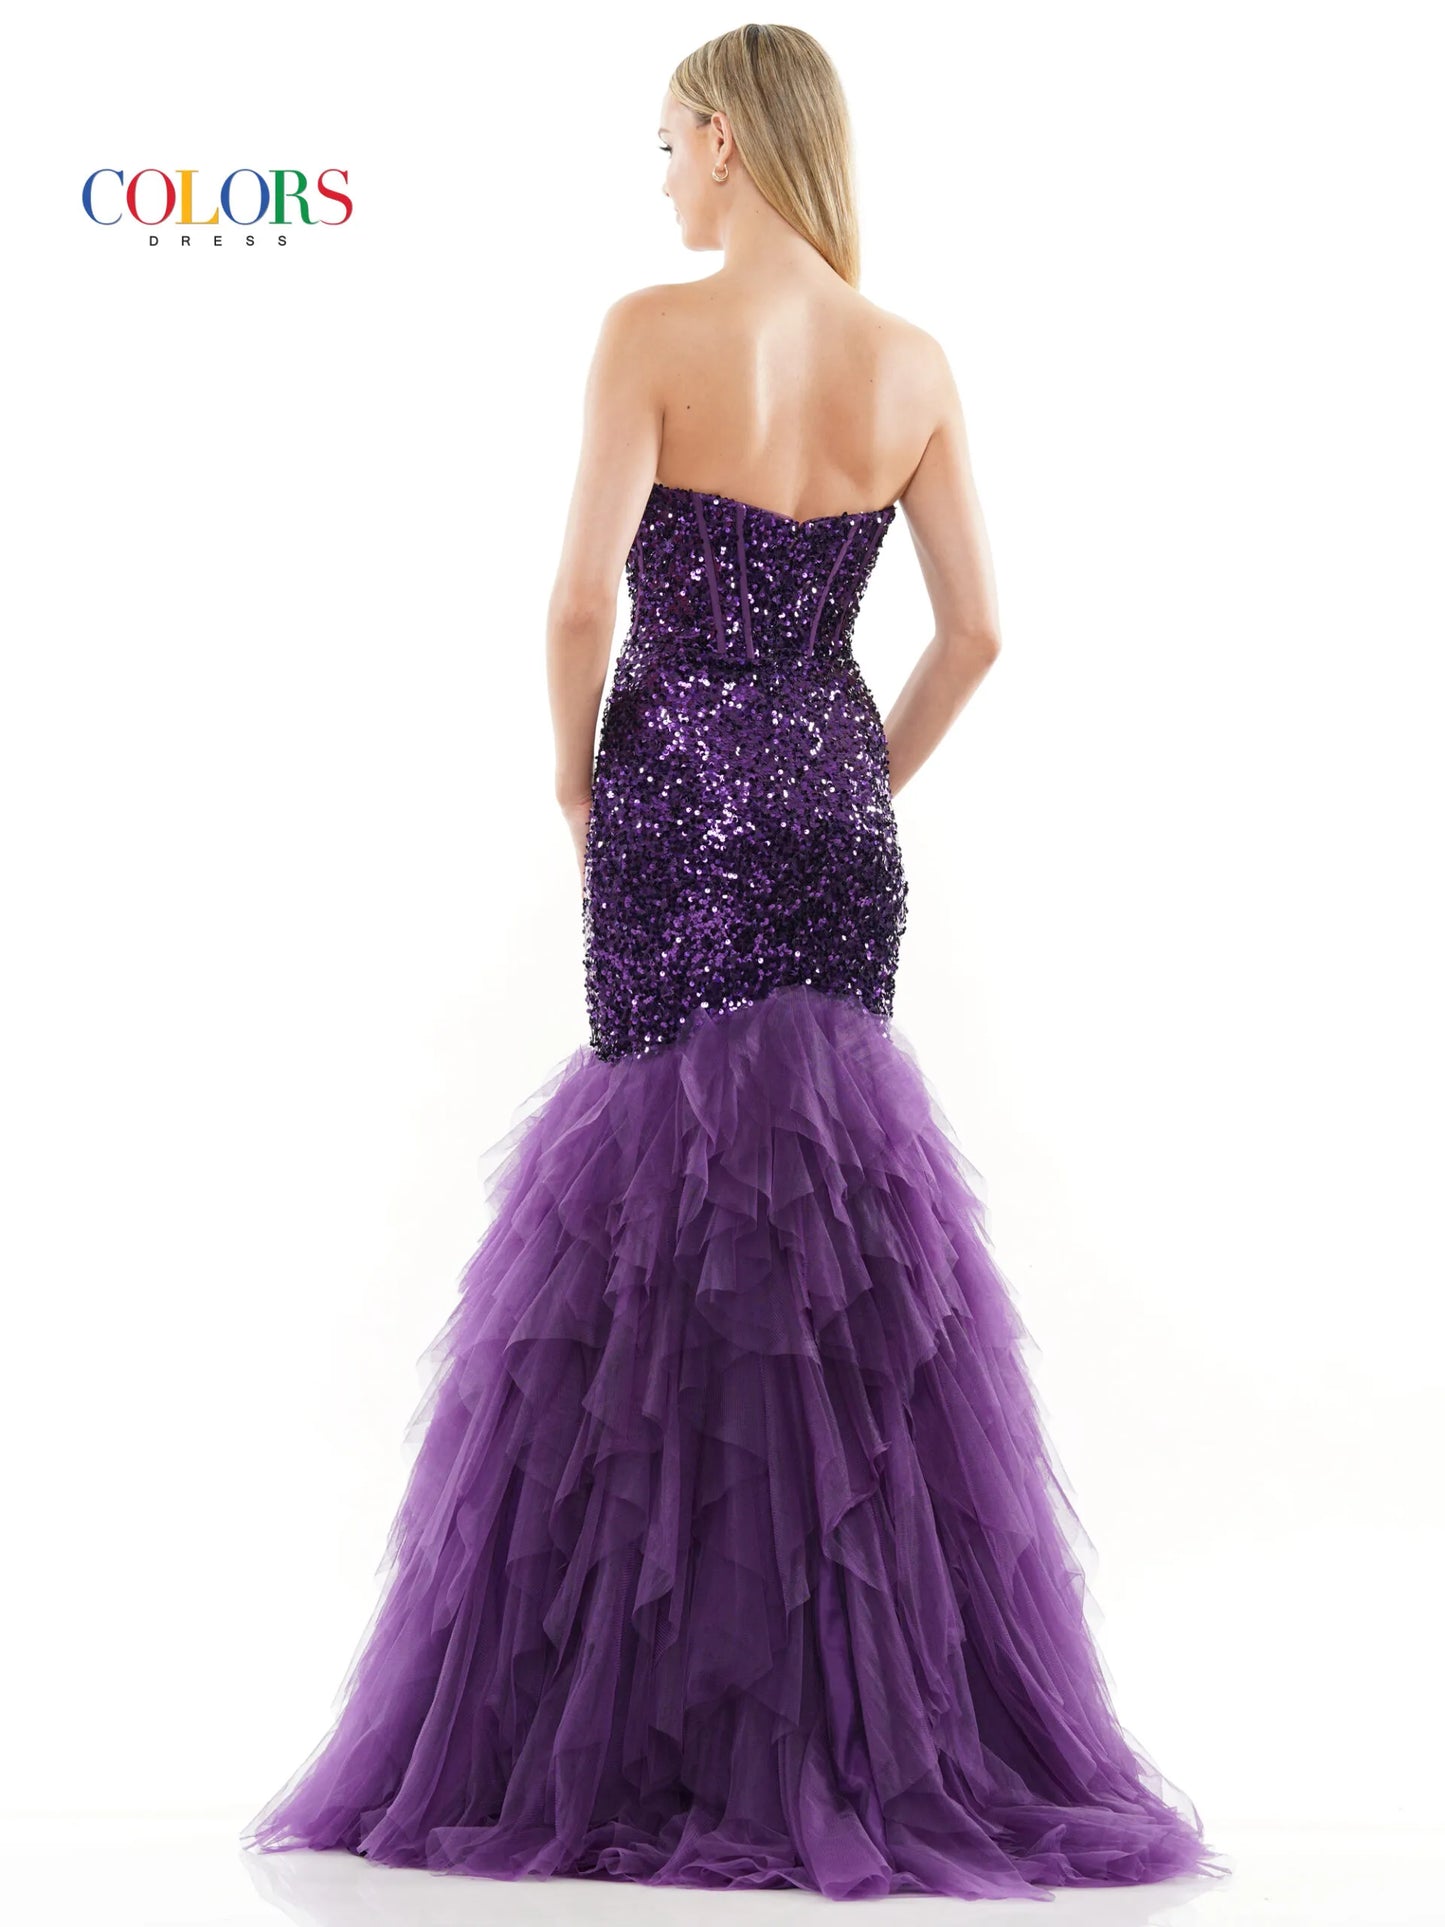 This beautiful Colors Dress 3202 Mermaid Prom Dress features a strapless corset bodice with boning peak points, a fitted sequin bodice and a ruffle tulle trumpet skirt for an elegant look. Perfect for any formal occasion. Prom, Pageant, Formal evening Gown.  Sizes: 2-24  Colors: Black, Light Blue, Purple, Red